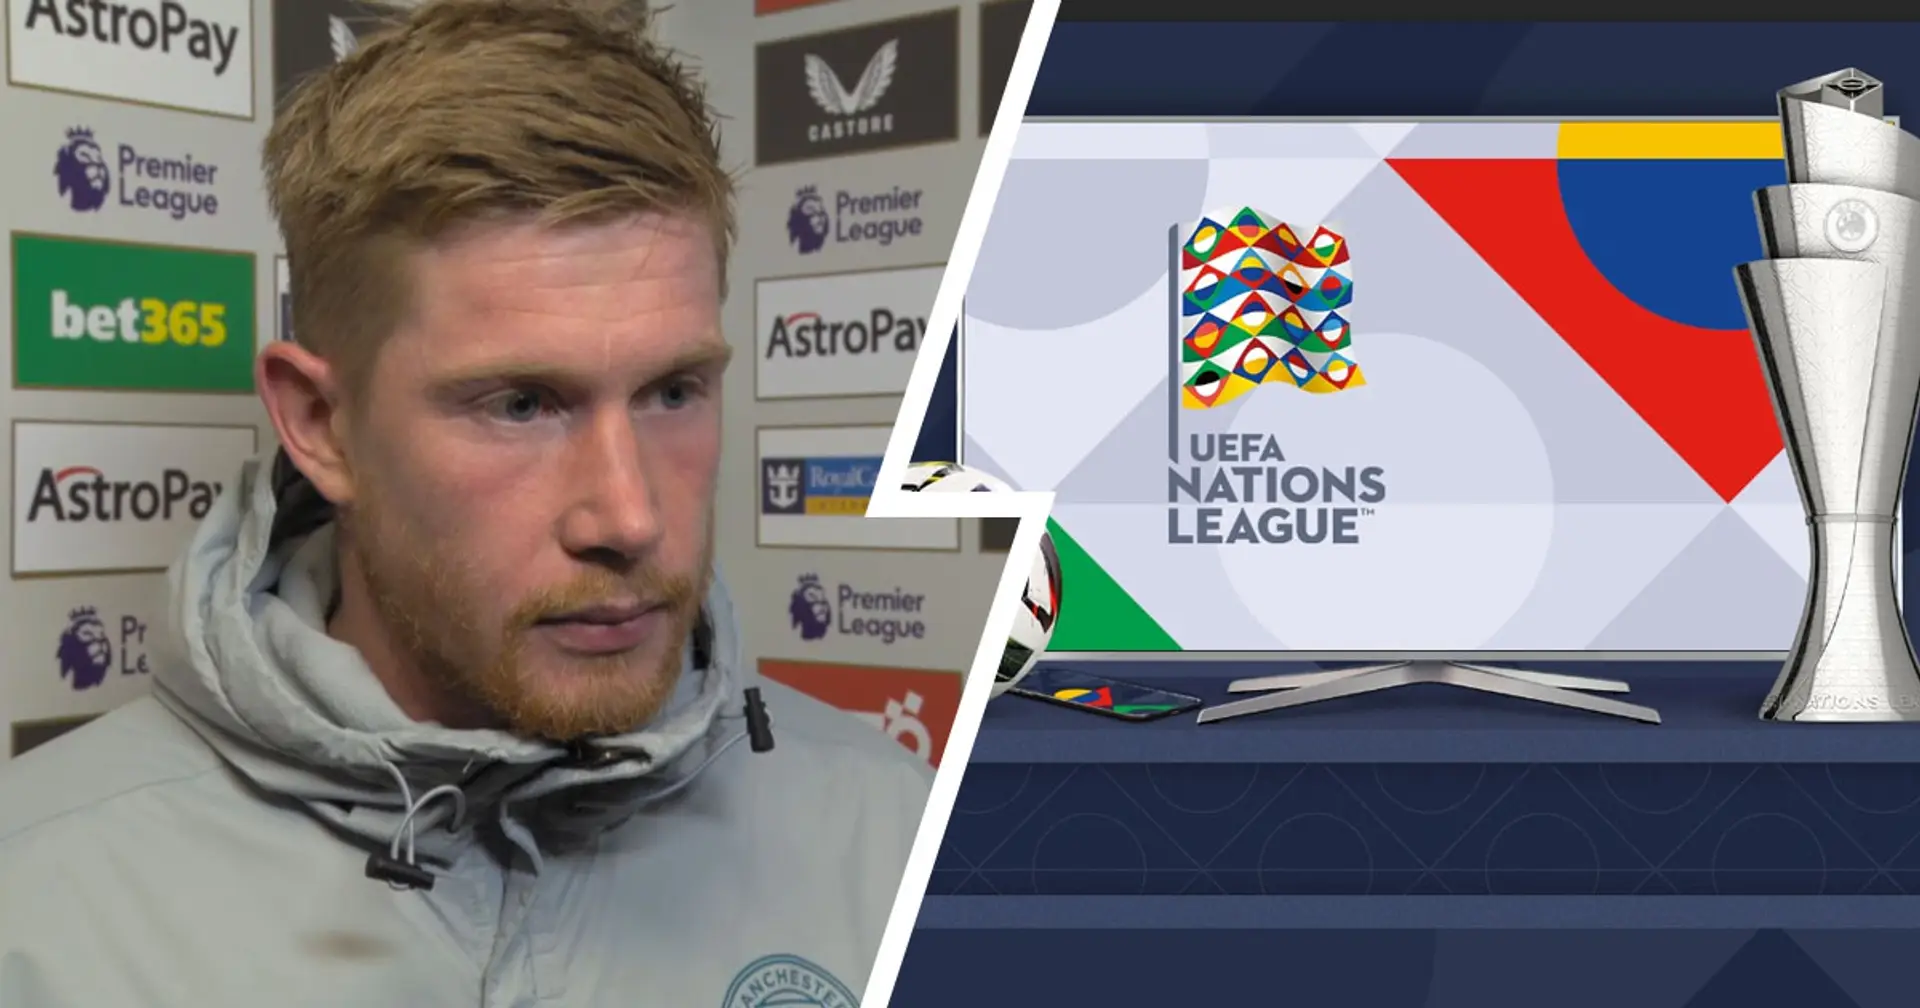 Kevin De Bruyne: 'The Nations League is just glorified friendlies and unimportant in my eyes'